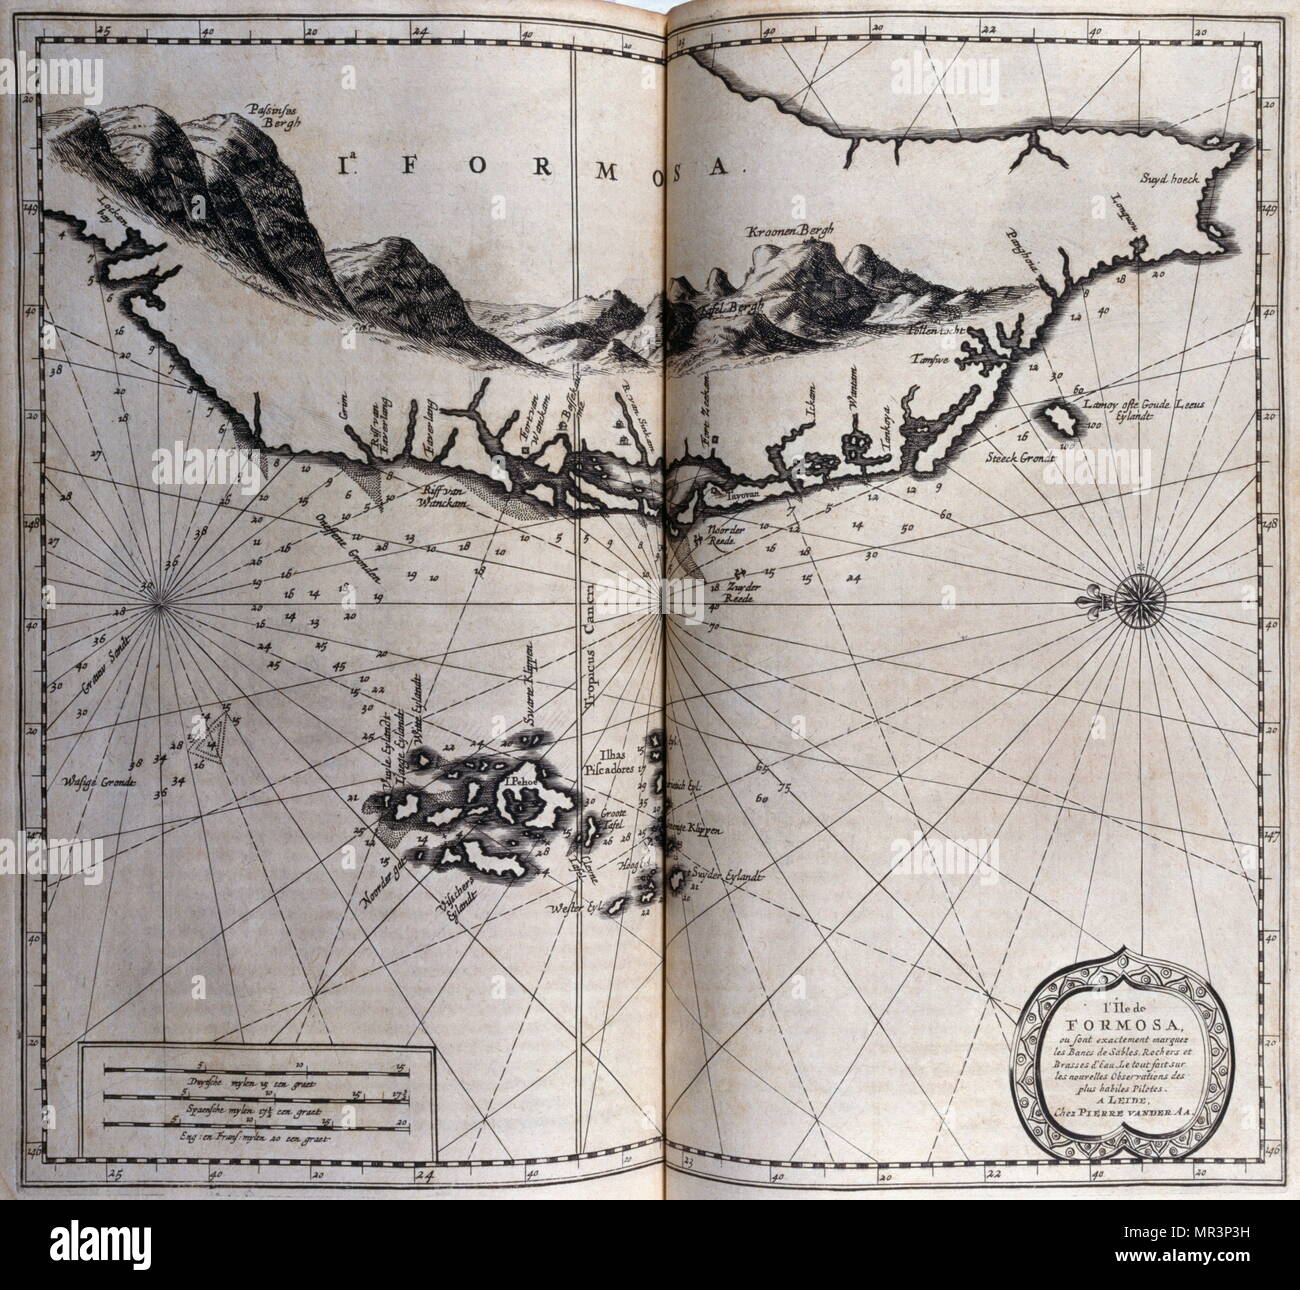 Map of Formosa Island (now Taiwan).  From voyages made to Persia and India 1727, by Johan Albrecht de Mandelslo (1616–1644). seventeenth-century German adventurer, who wrote about his travels through Persia and India. Stock Photo